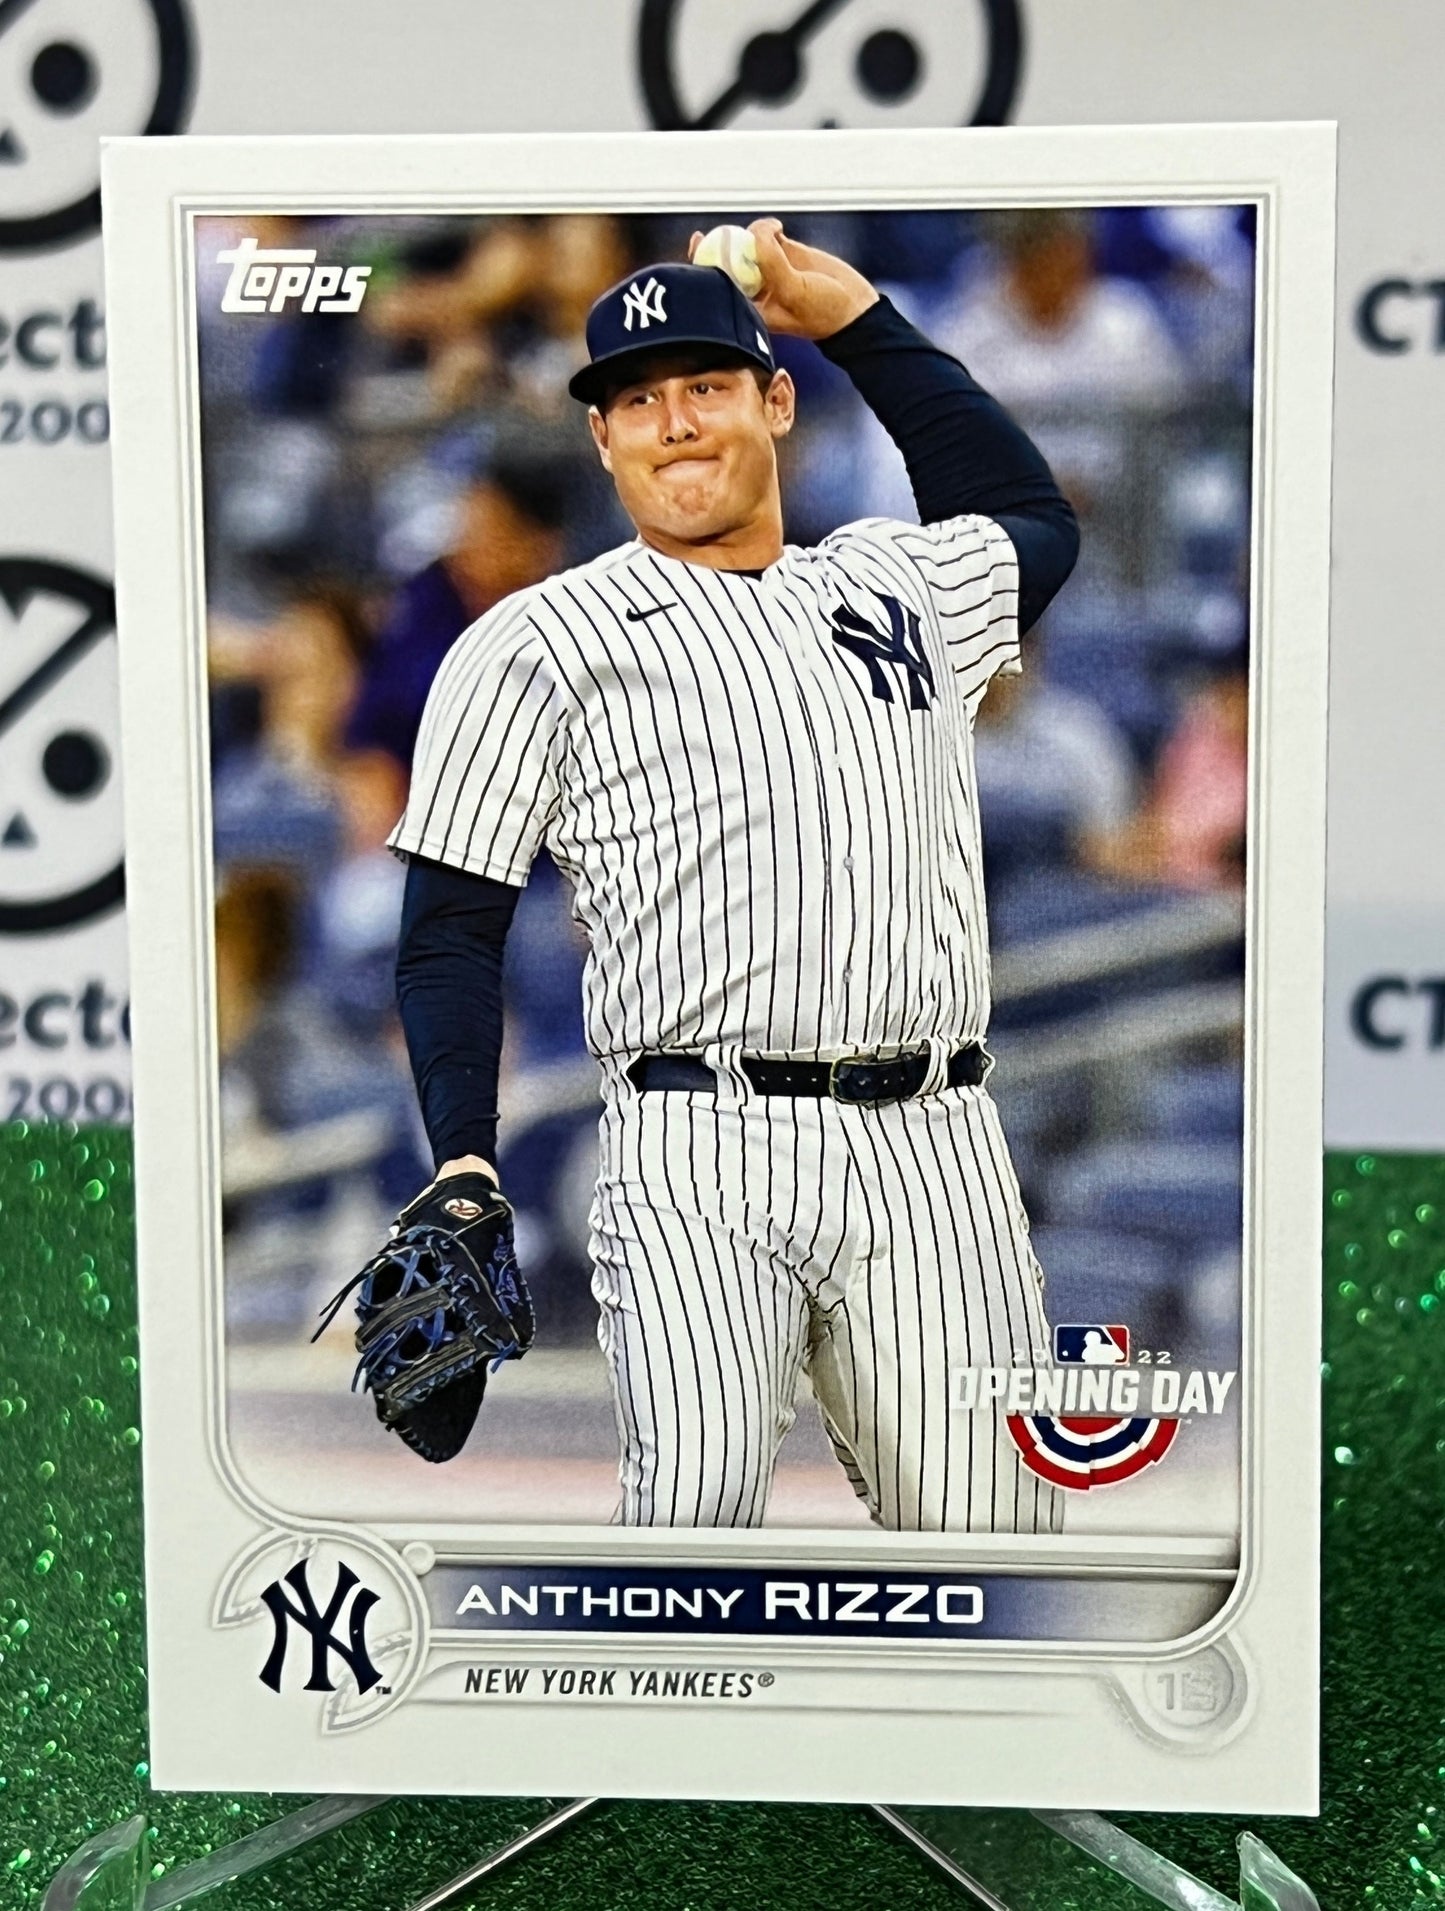 2022 TOPPS OPENING DAY ANTHONY RIZZO # 167  NEW YORK YANKEES BASEBALL CARD